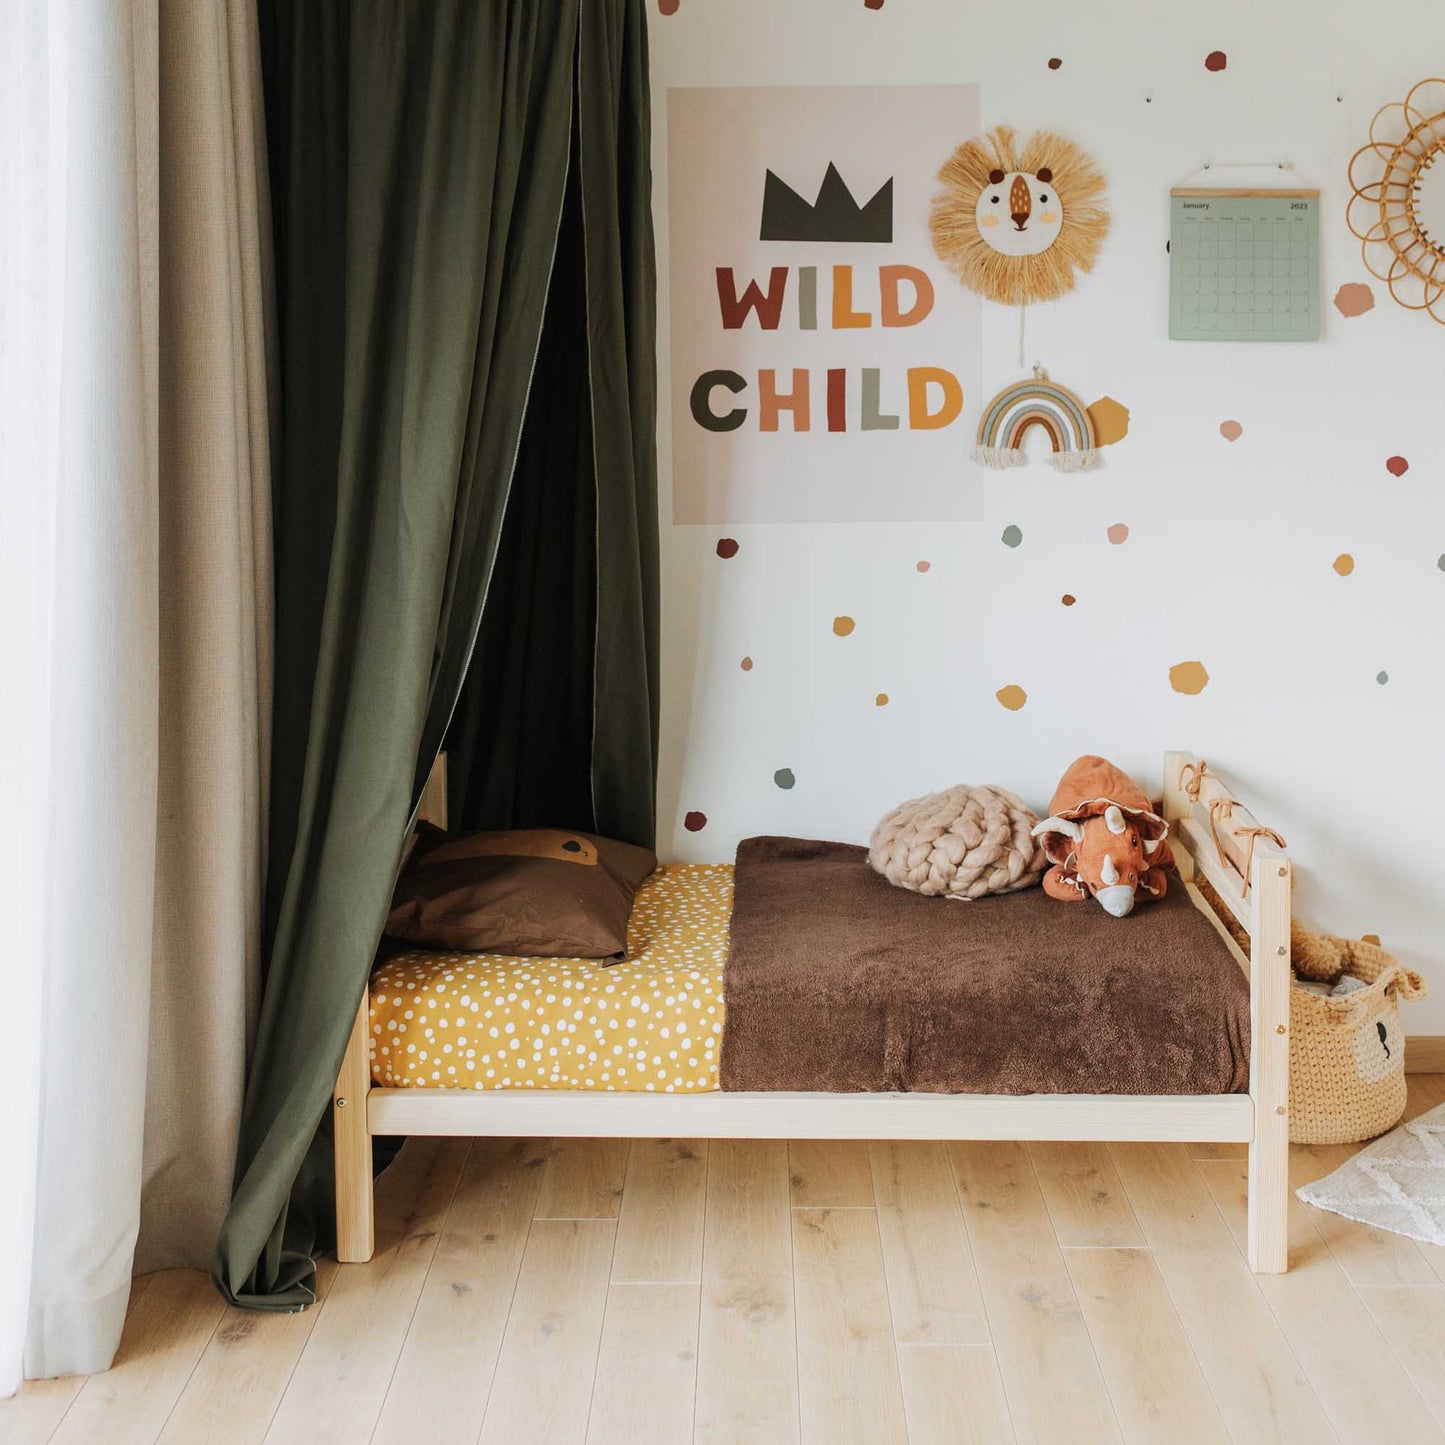 A child's room with a Sweet Home From Wood 2-in-1 kids' bed with a horizontal rail headboard and footboard that is long-lasting and grows with the child, surrounded by teddy bears.